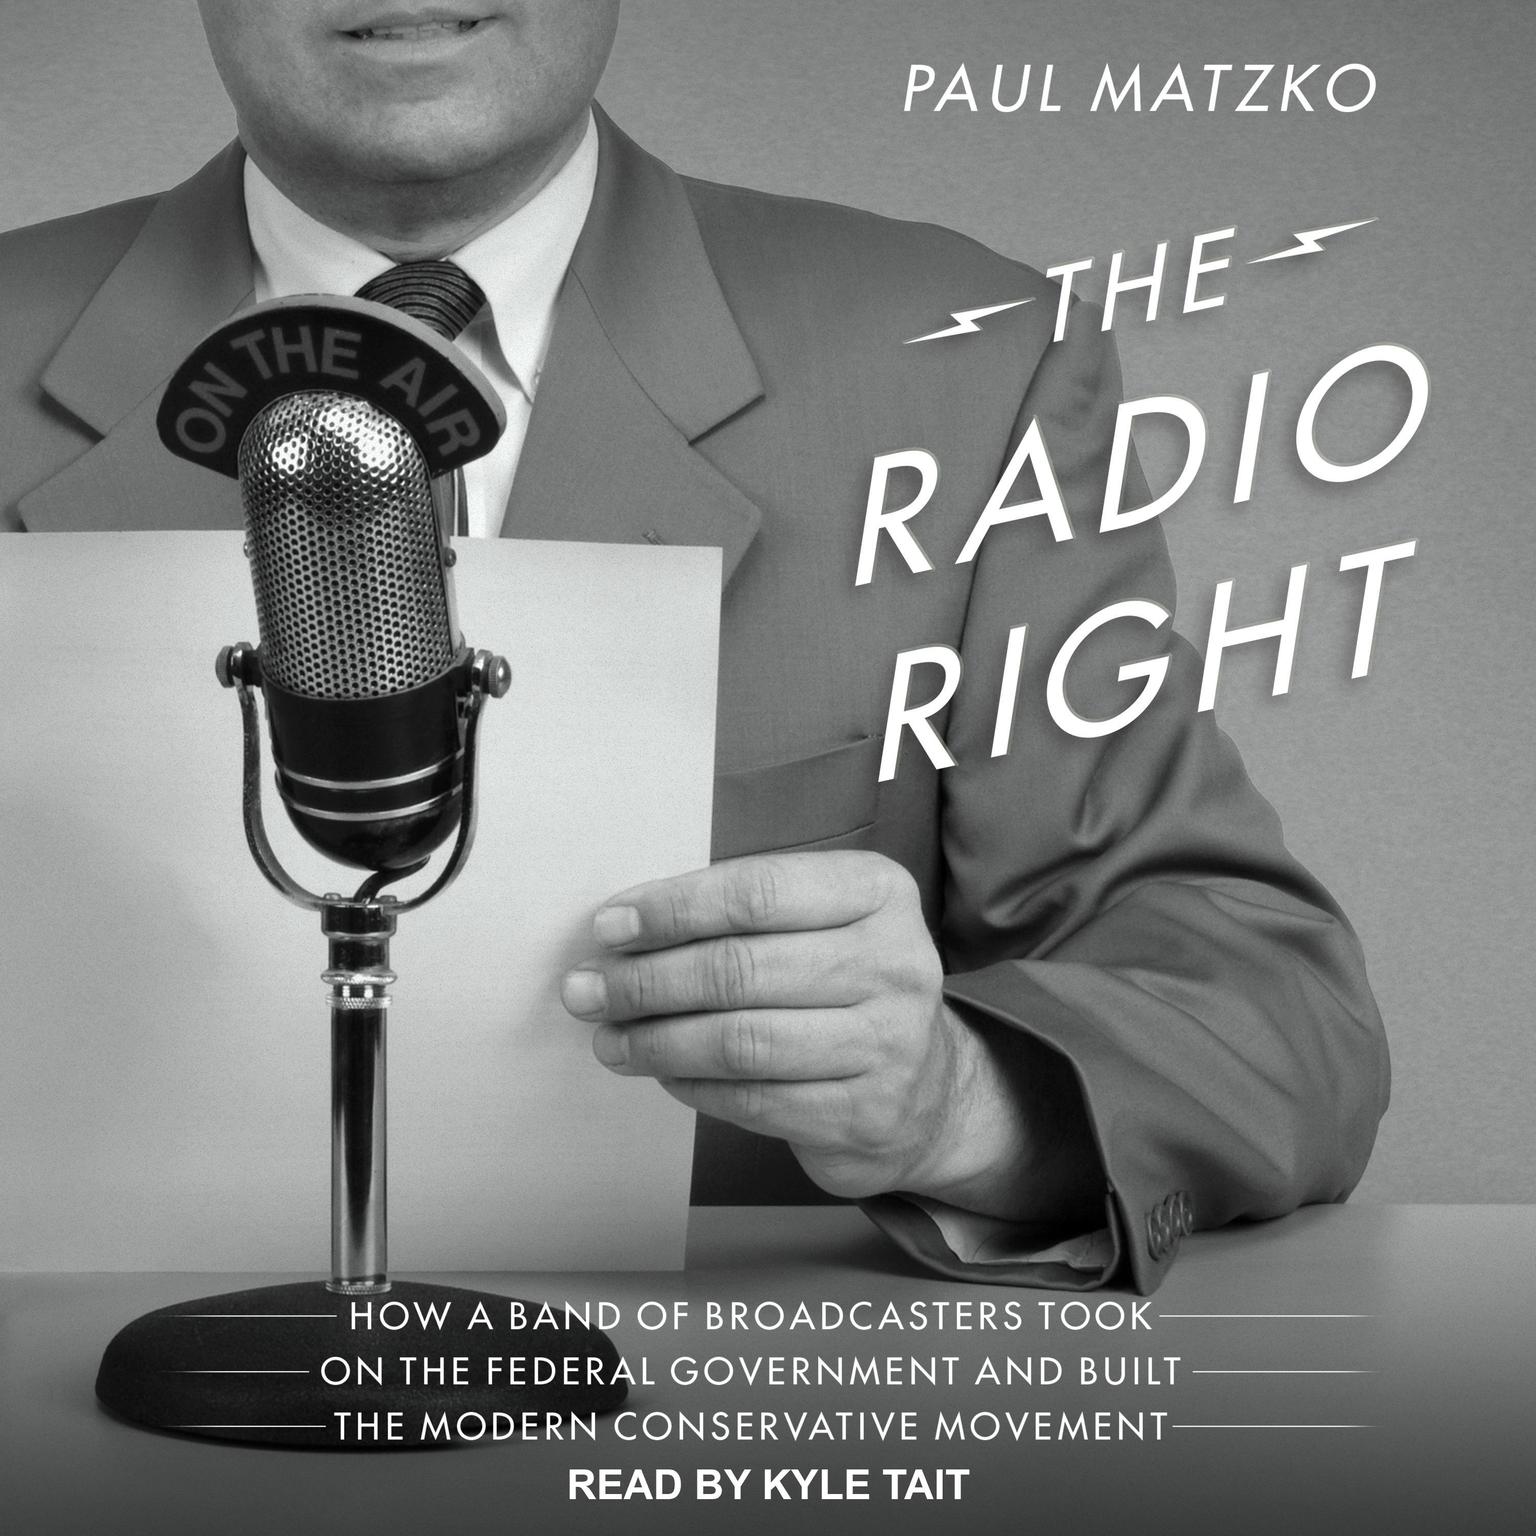 The Radio Right: How a Band of Broadcasters Took on the Federal Government and Built the Modern Conservative Movement Audiobook, by Paul Matzko